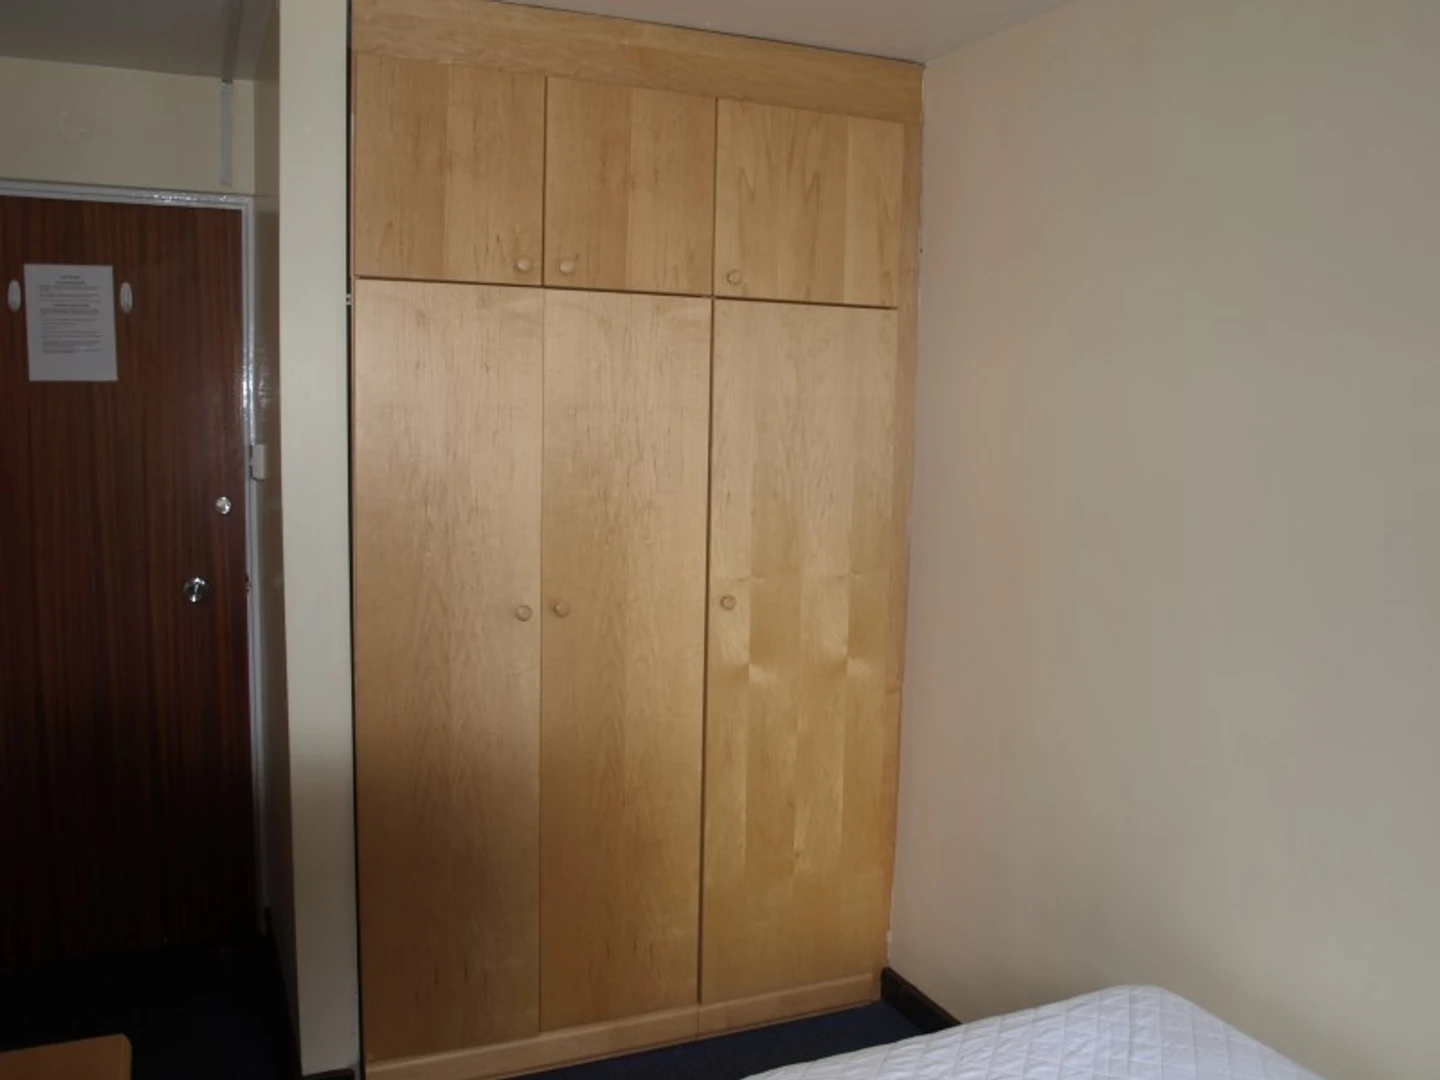 Shared room in 3-bedroom flat Newcastle Upon Tyne